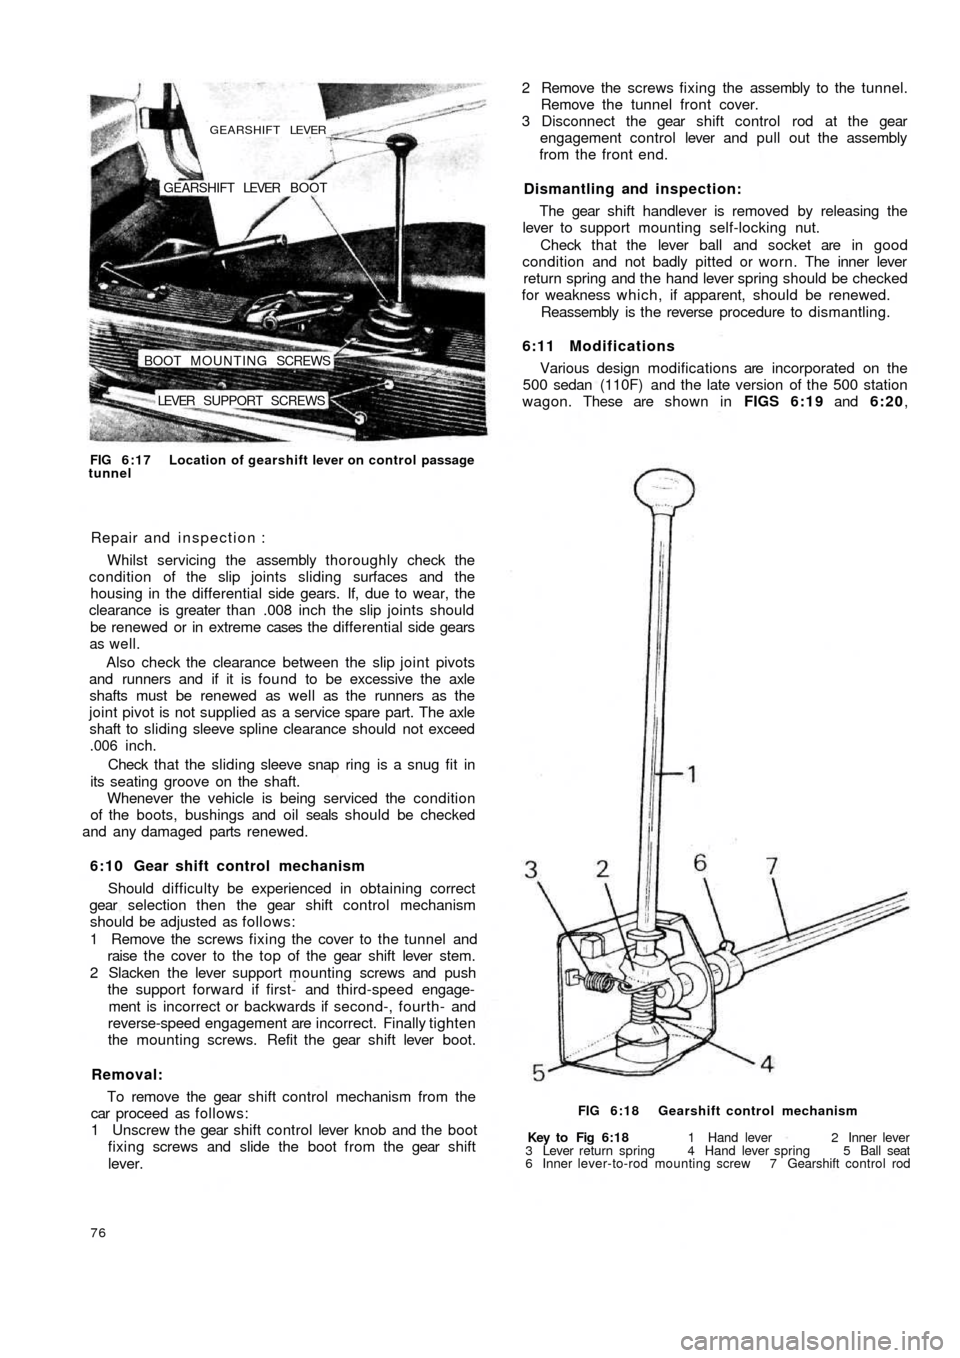 FIAT 500 1968 1.G Workshop Manual LEVER  SUPPORT SCREWS BOOT MOUNTING SCREWSGEARSHIFT LEVER  BOOT
GEARSHIFT LEVER
FIG 6:17 Location of gearshift lever on control  passage
tunnel
Repair and inspection :
Whilst servicing the assembly th